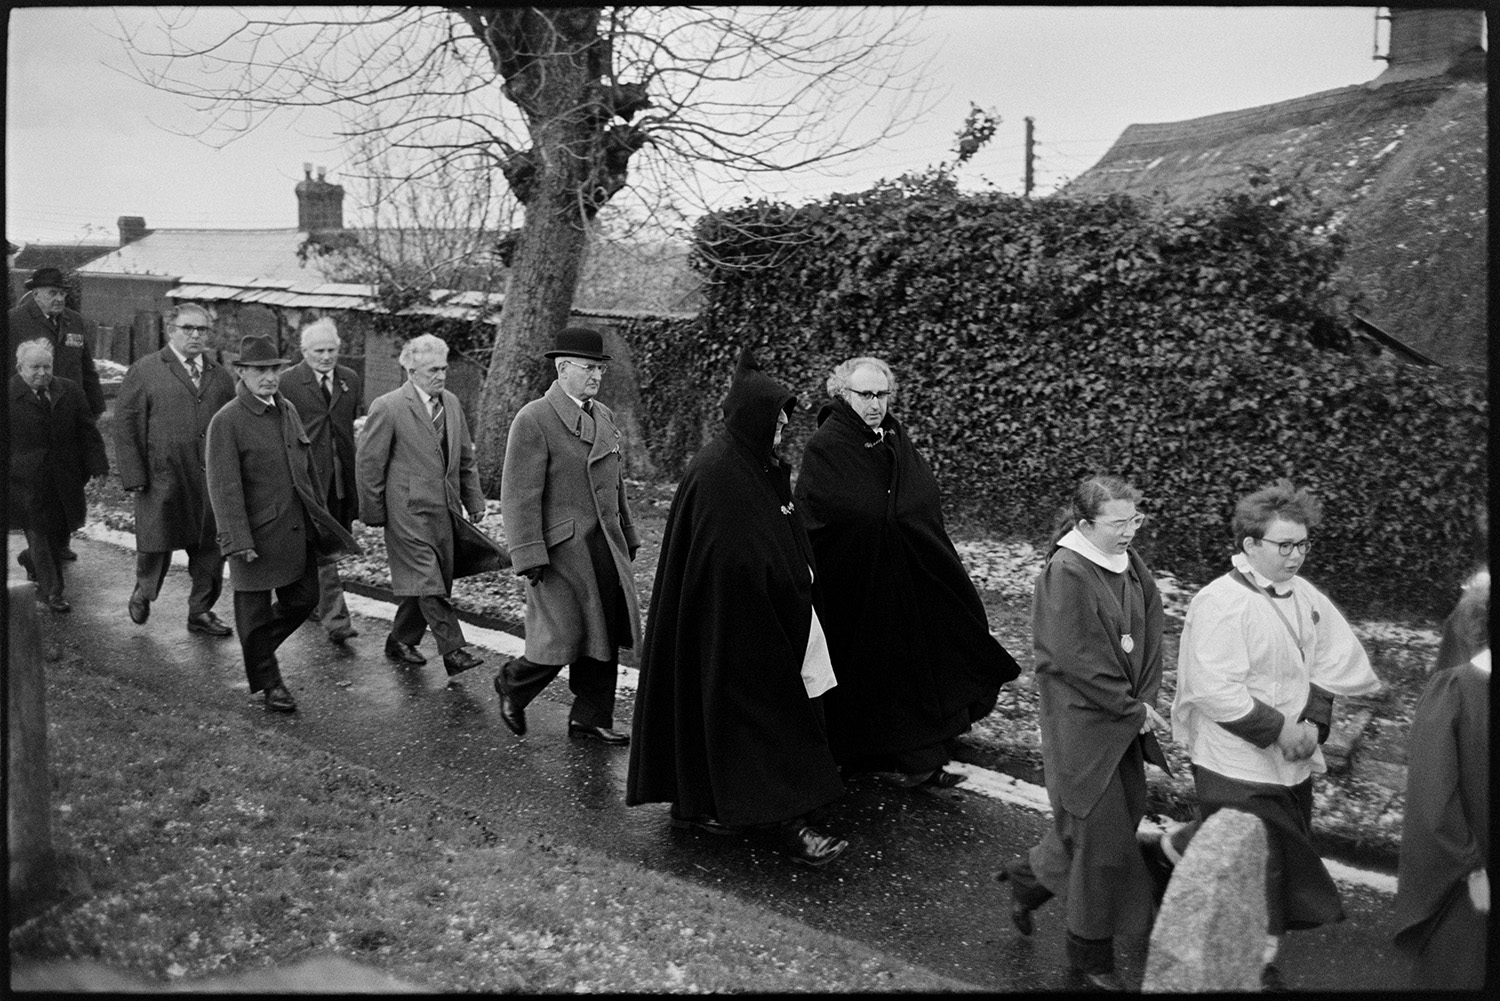 Armistice day parade, women and men, old soldiers in church and parade past memorial, wreaths. 
[Choristers and men walking along the path at Winkleigh church past the war memorial on Remembrance Day. Two men, possibly clergy, are wearing capes. The ground is covered with hail stones.]